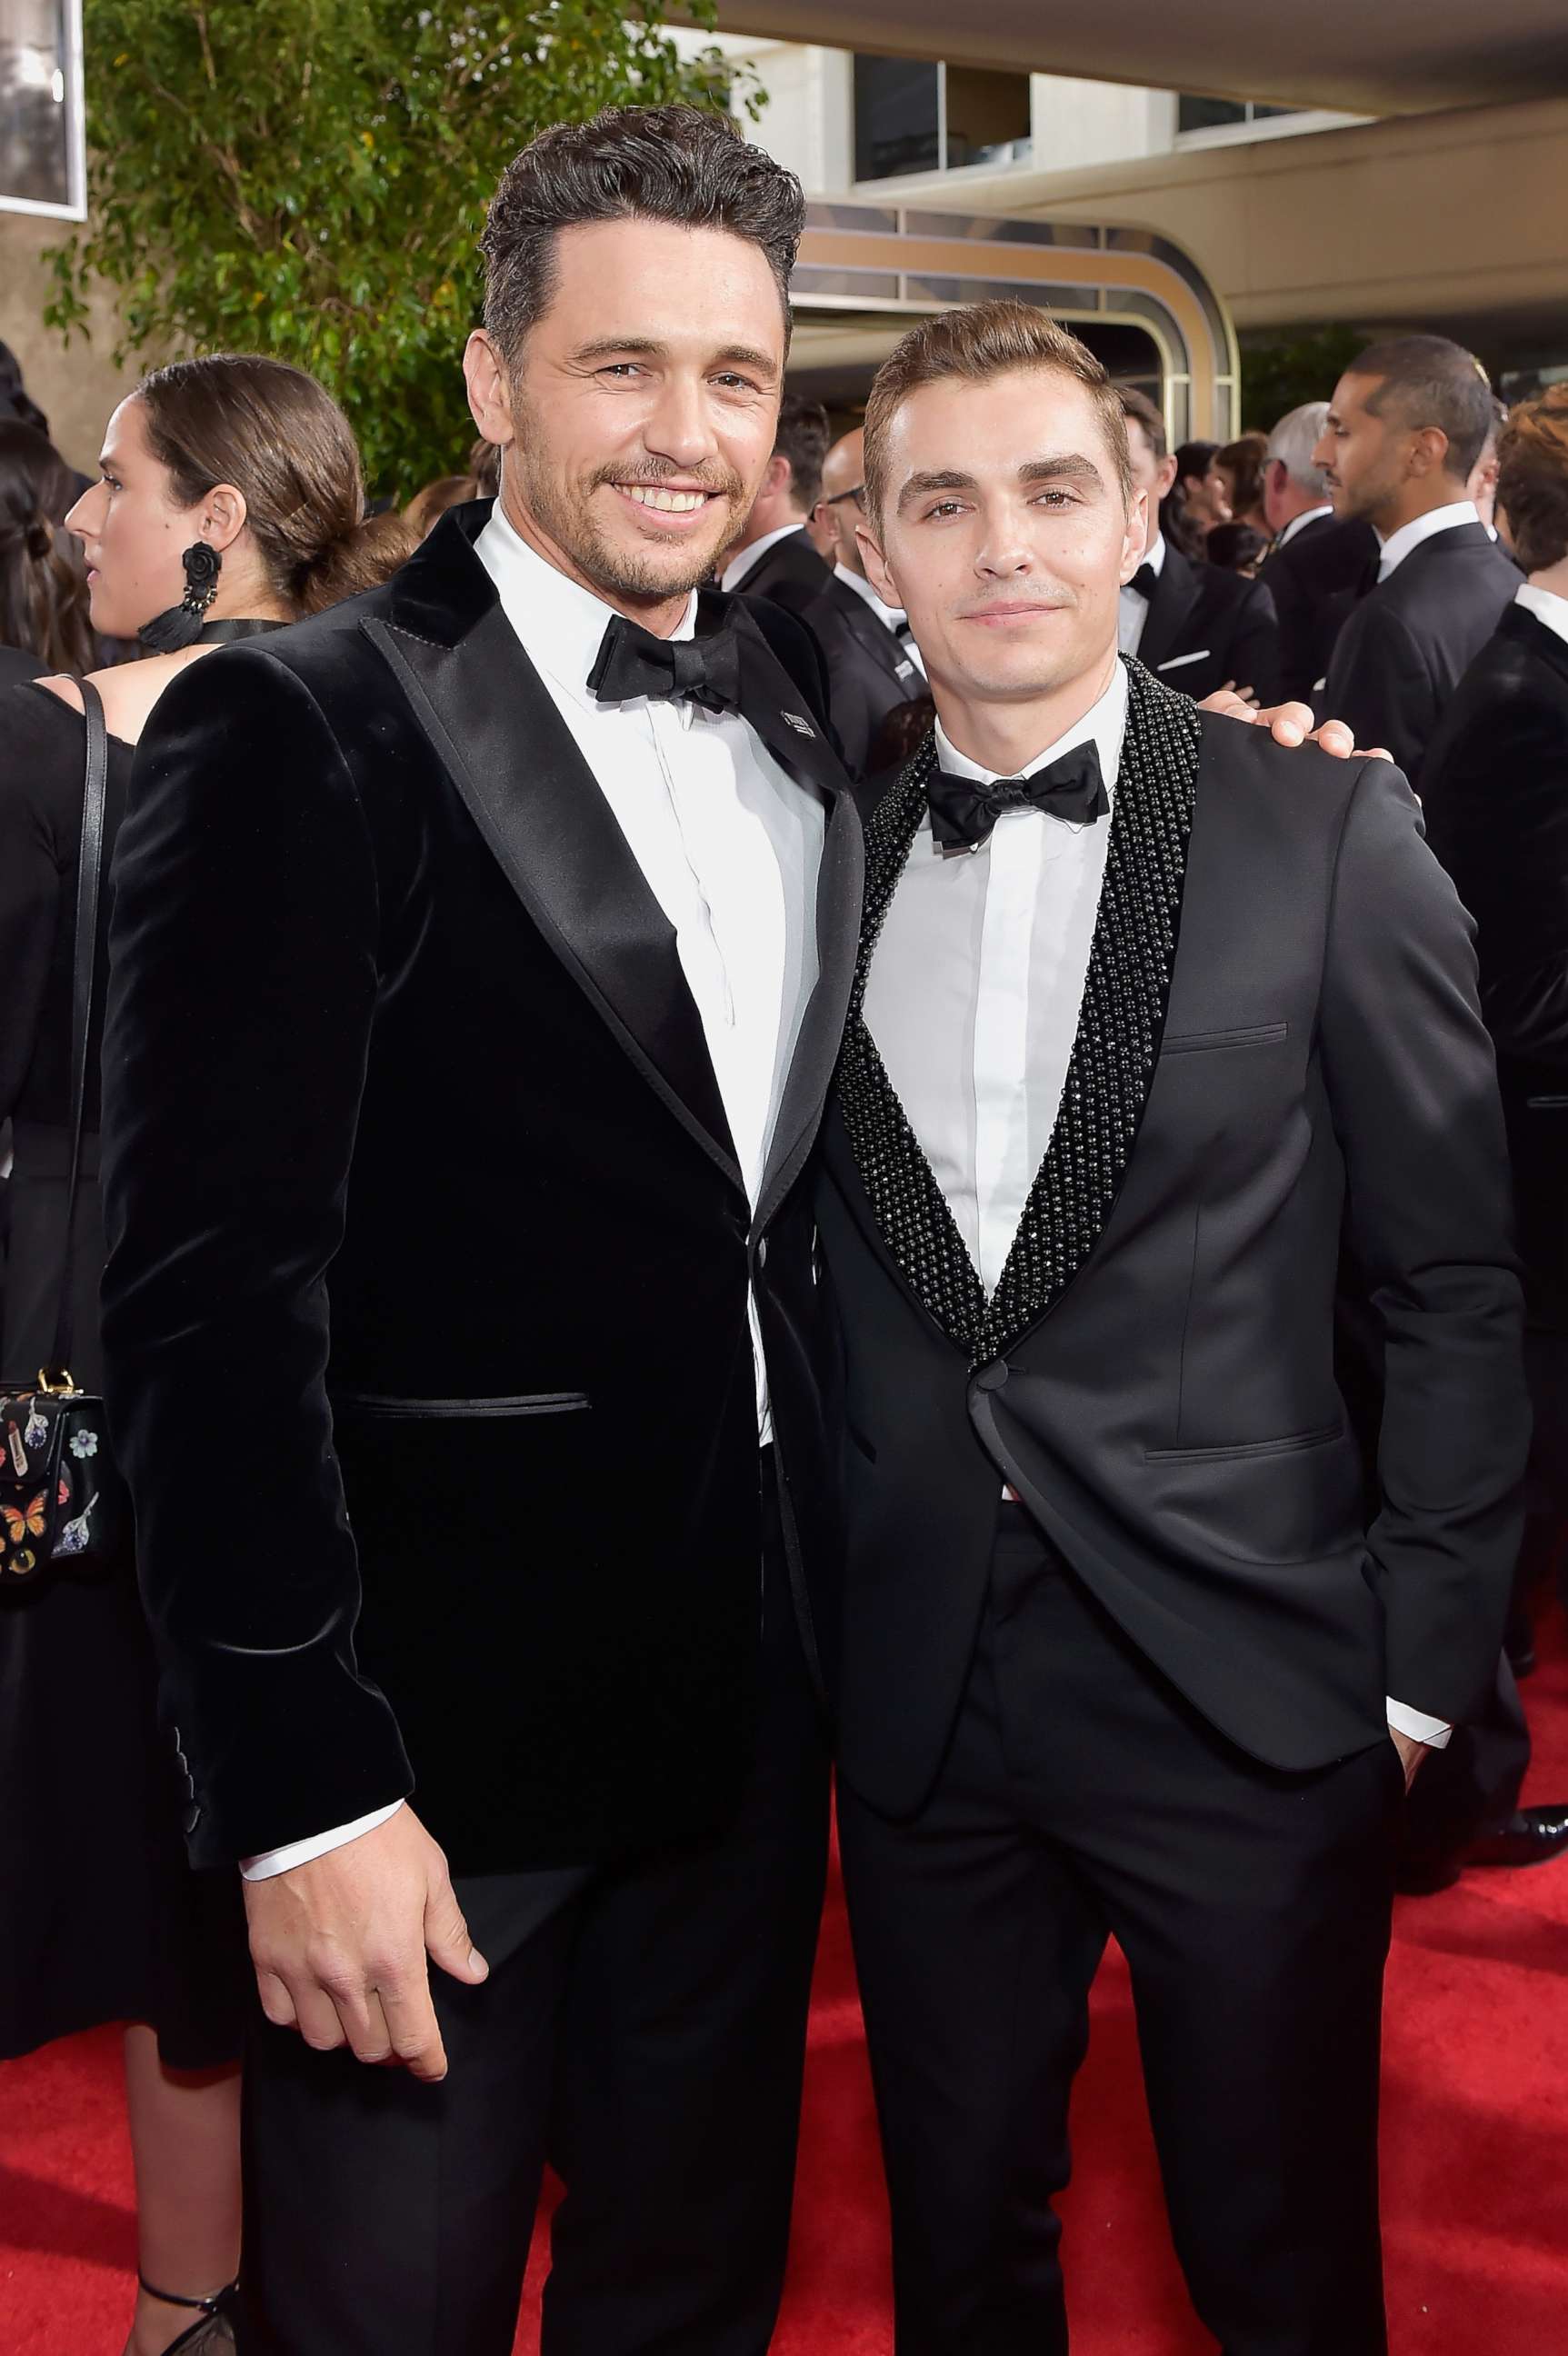 PHOTO: James Franco and Dave Franco attend the 75th Annual Golden Globe Awards at the Beverly Hilton Hotel, Jan. 7, 2018, in Beverly Hills, Calif.